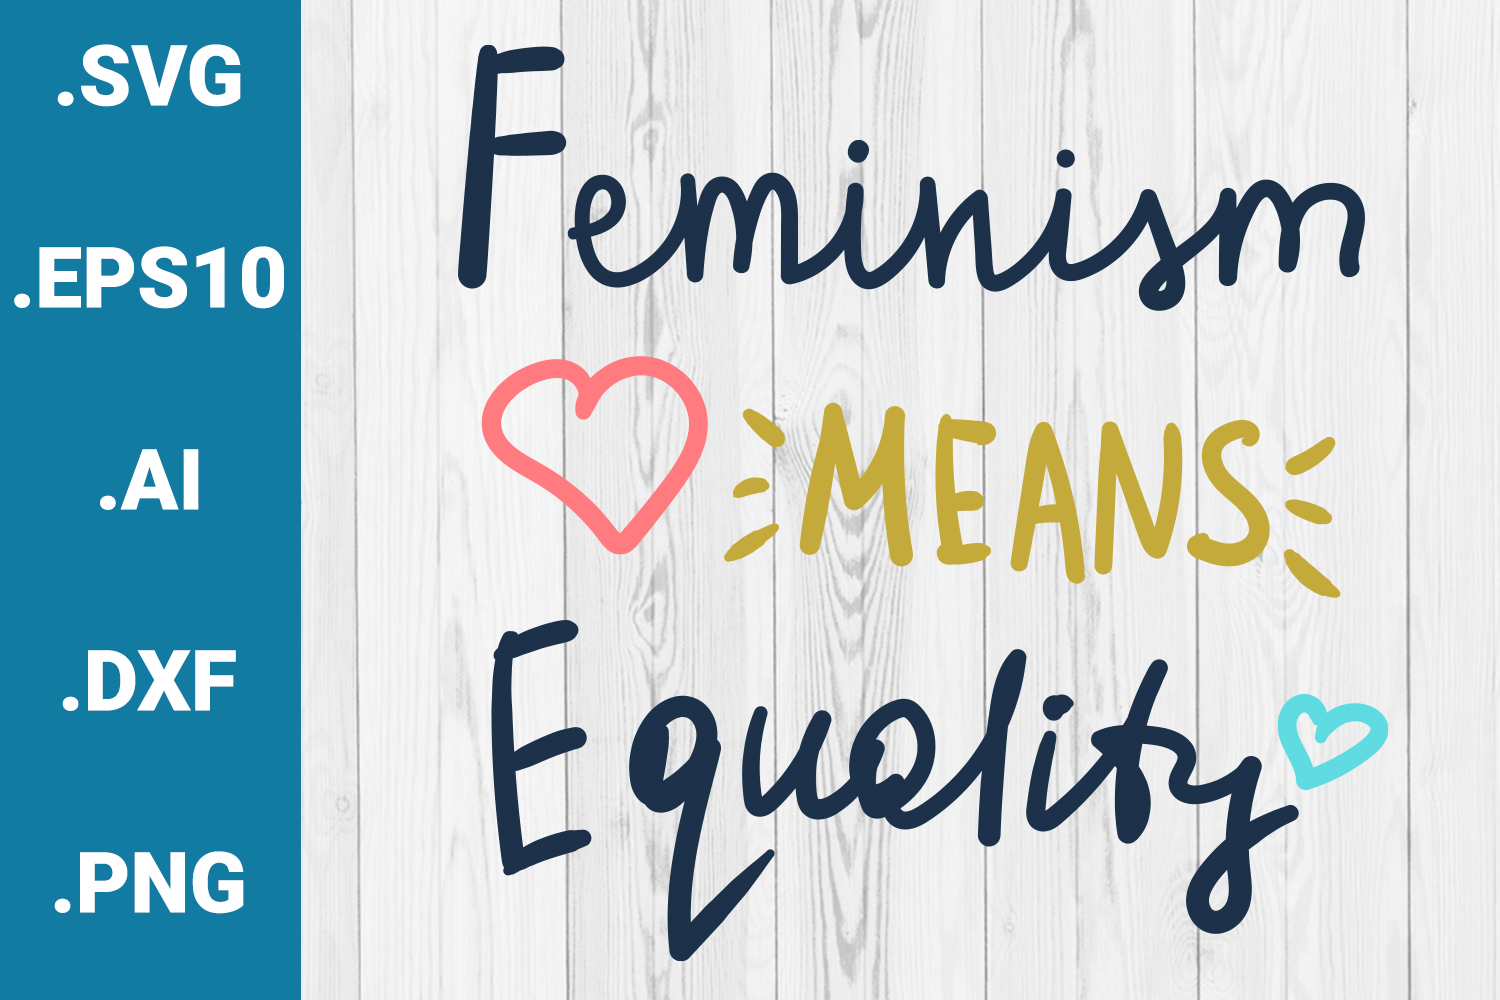 Feminism Means Equality Graphic · Creative Fabrica